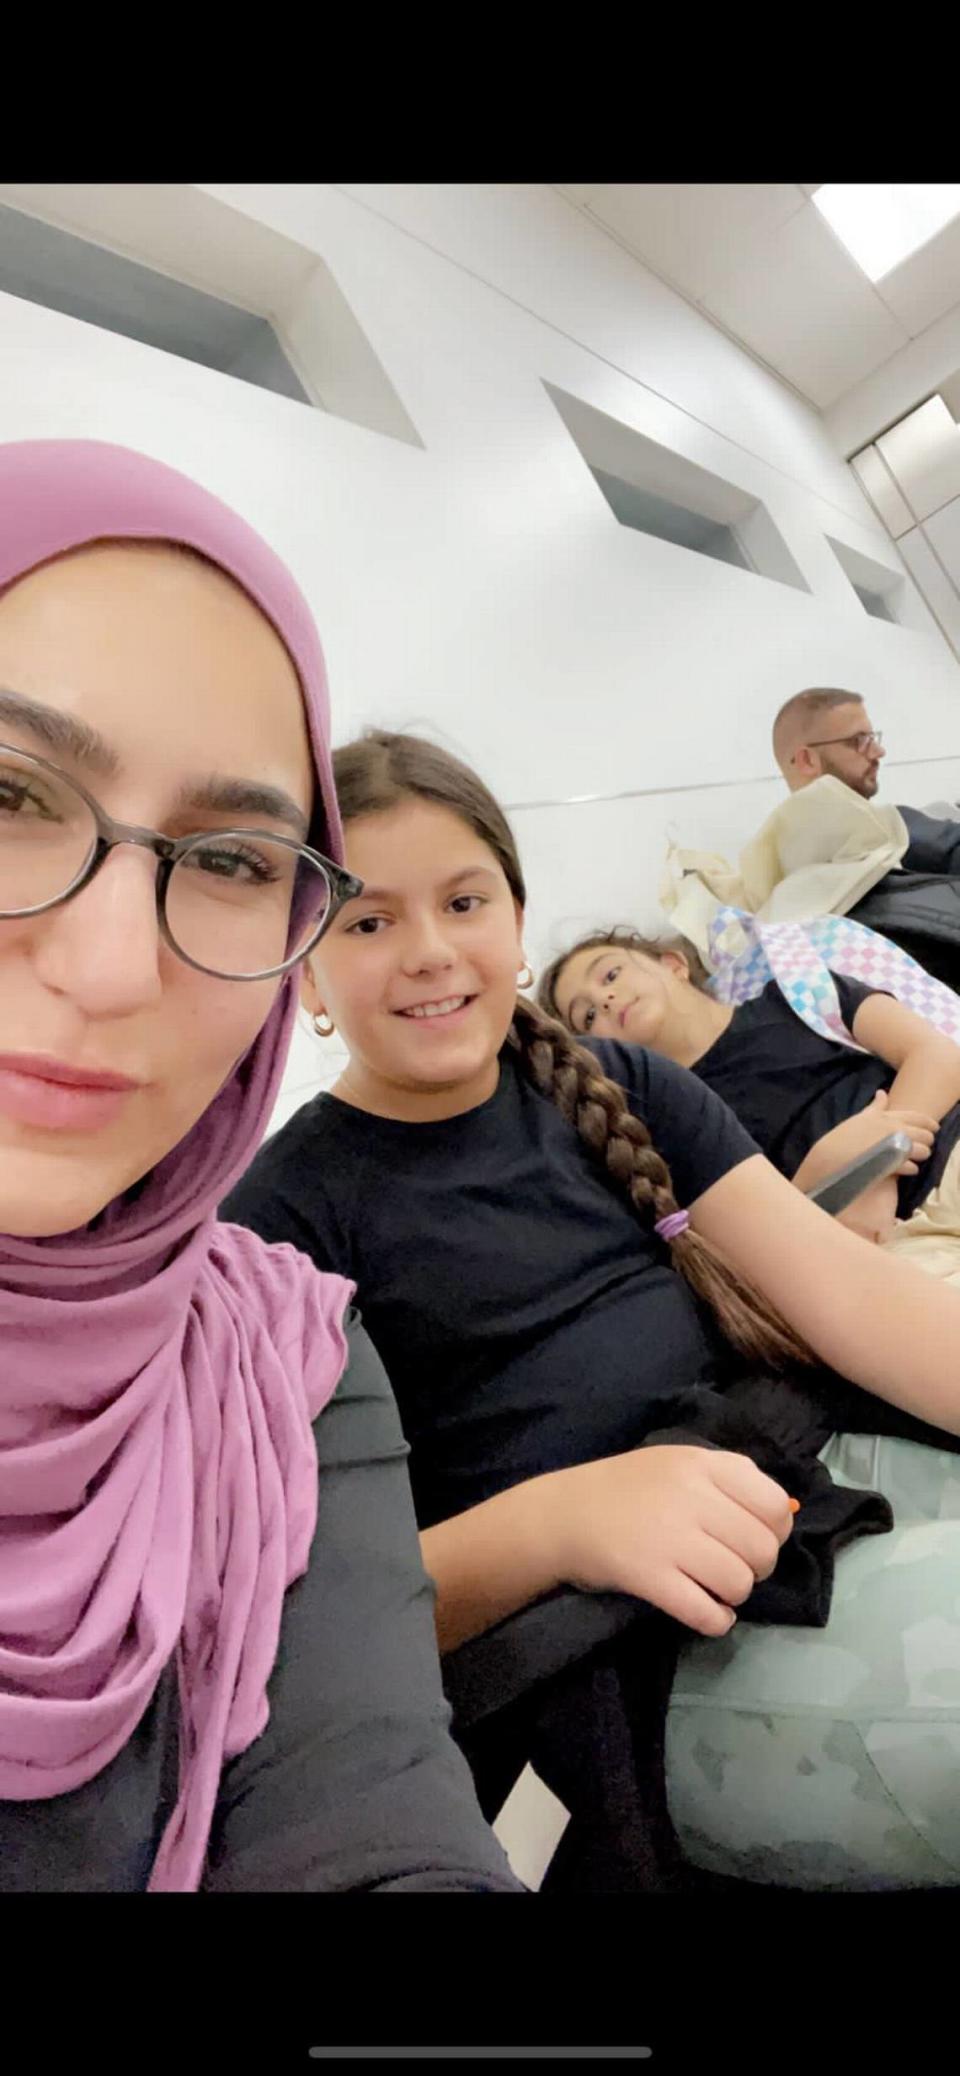 Lana Shehadeh poses with her daughters Lilly and Talia. Shehadeh, who grew up in Parkland, Florida, is an assistant professor of political science at the Arab American University and lives in the West Bank. Lana Shehadeh